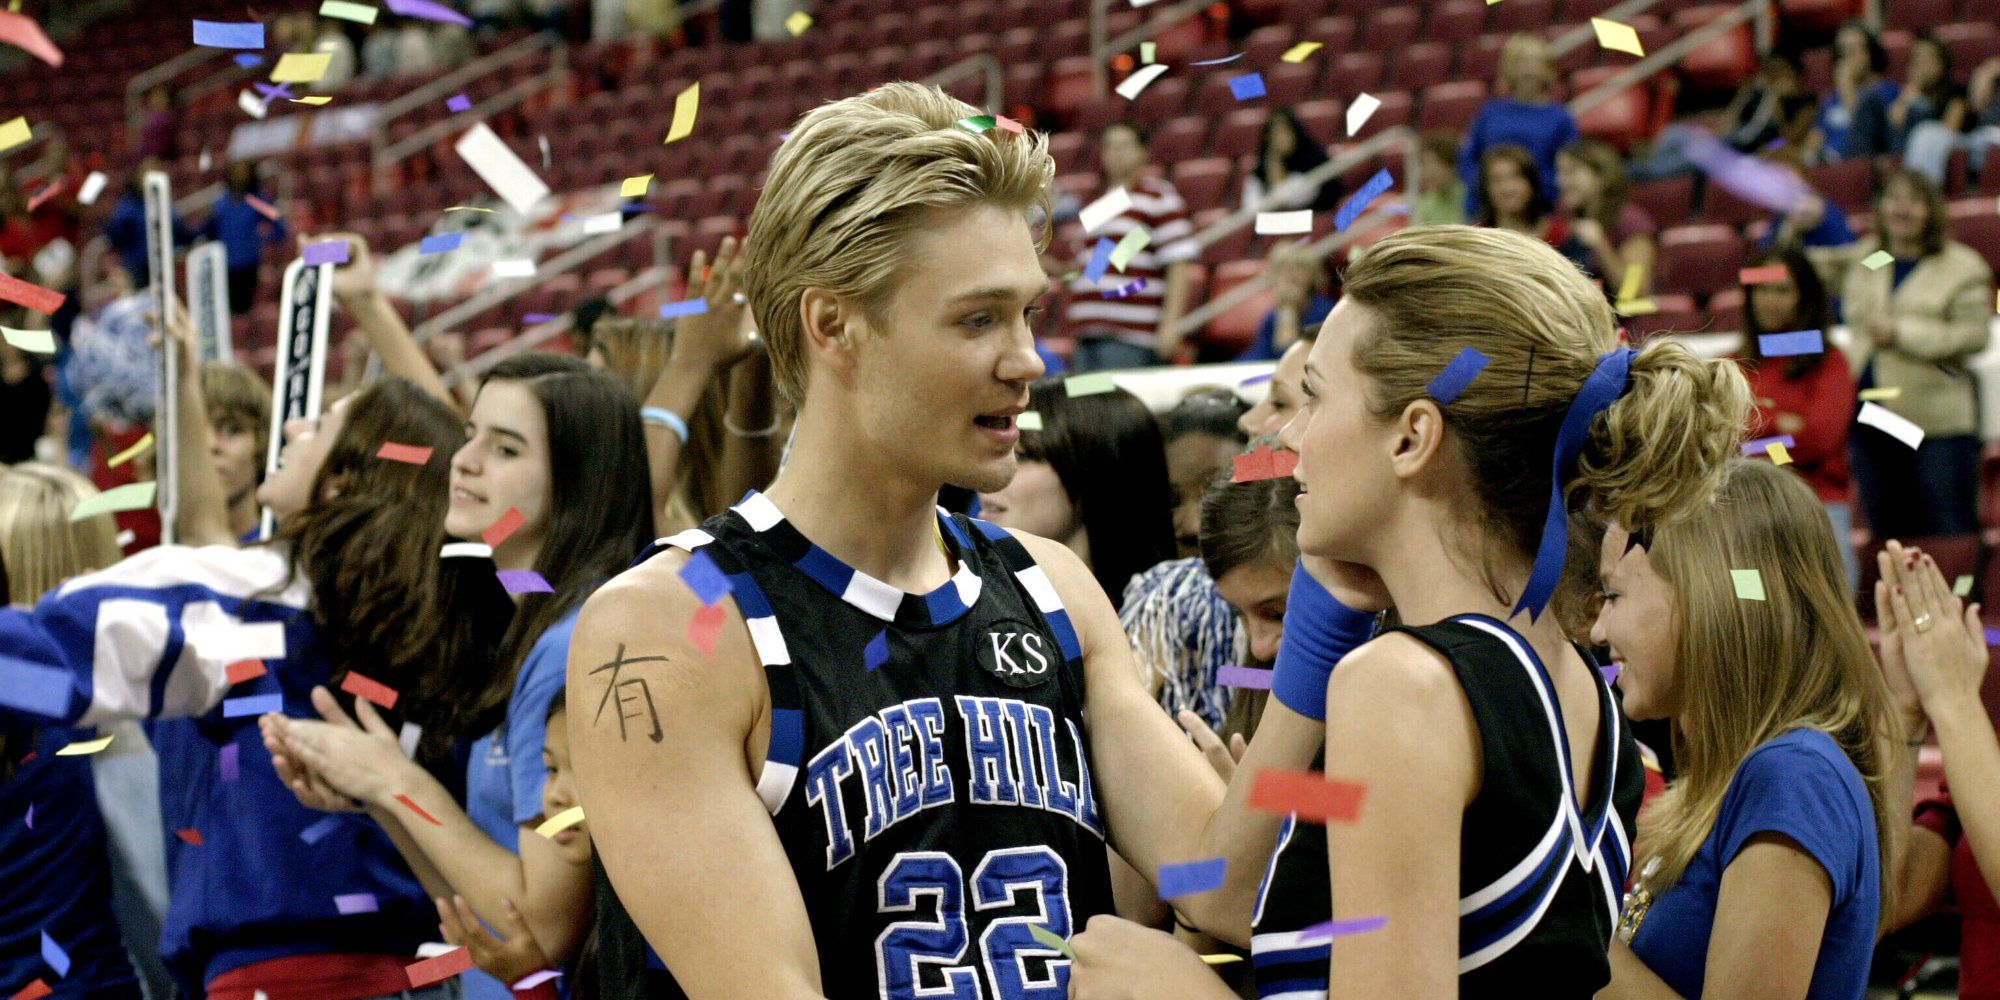 Lucas and Peyton smiling at each other at a basketball game on One Tree Hill